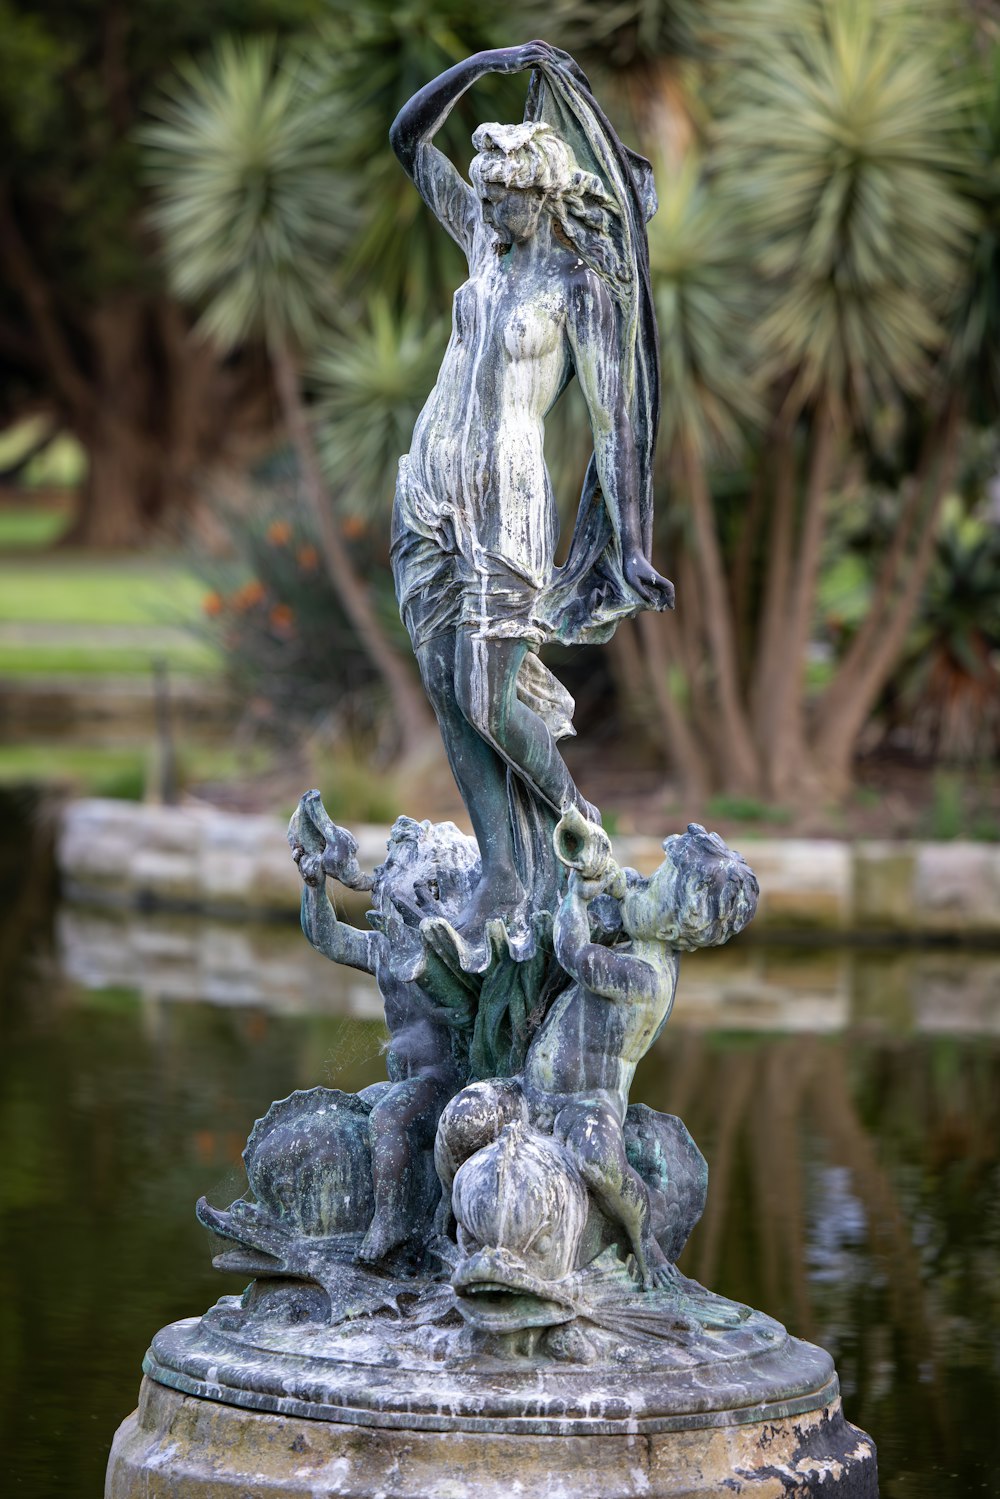 a fountain with a statue of a woman holding a bird